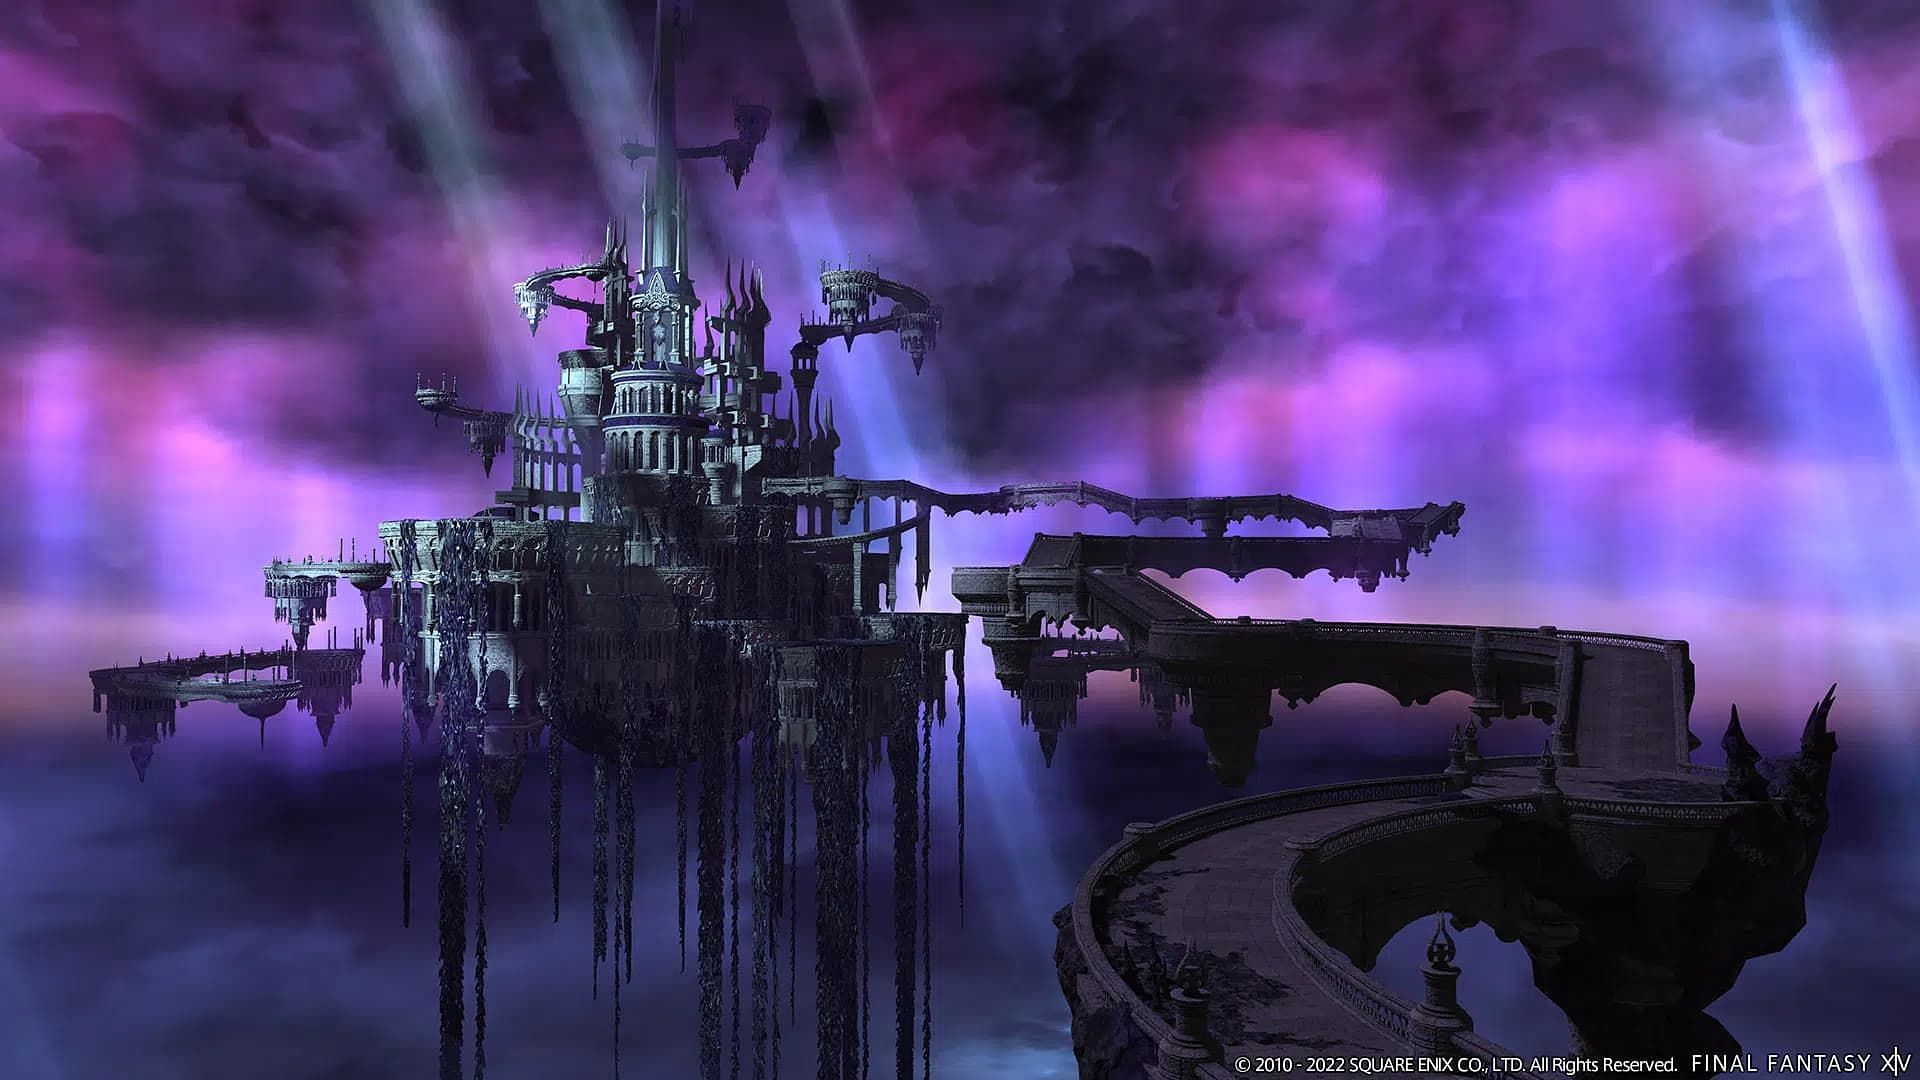 How to unlock The Fell Court of Troia in Final Fantasy XIV?